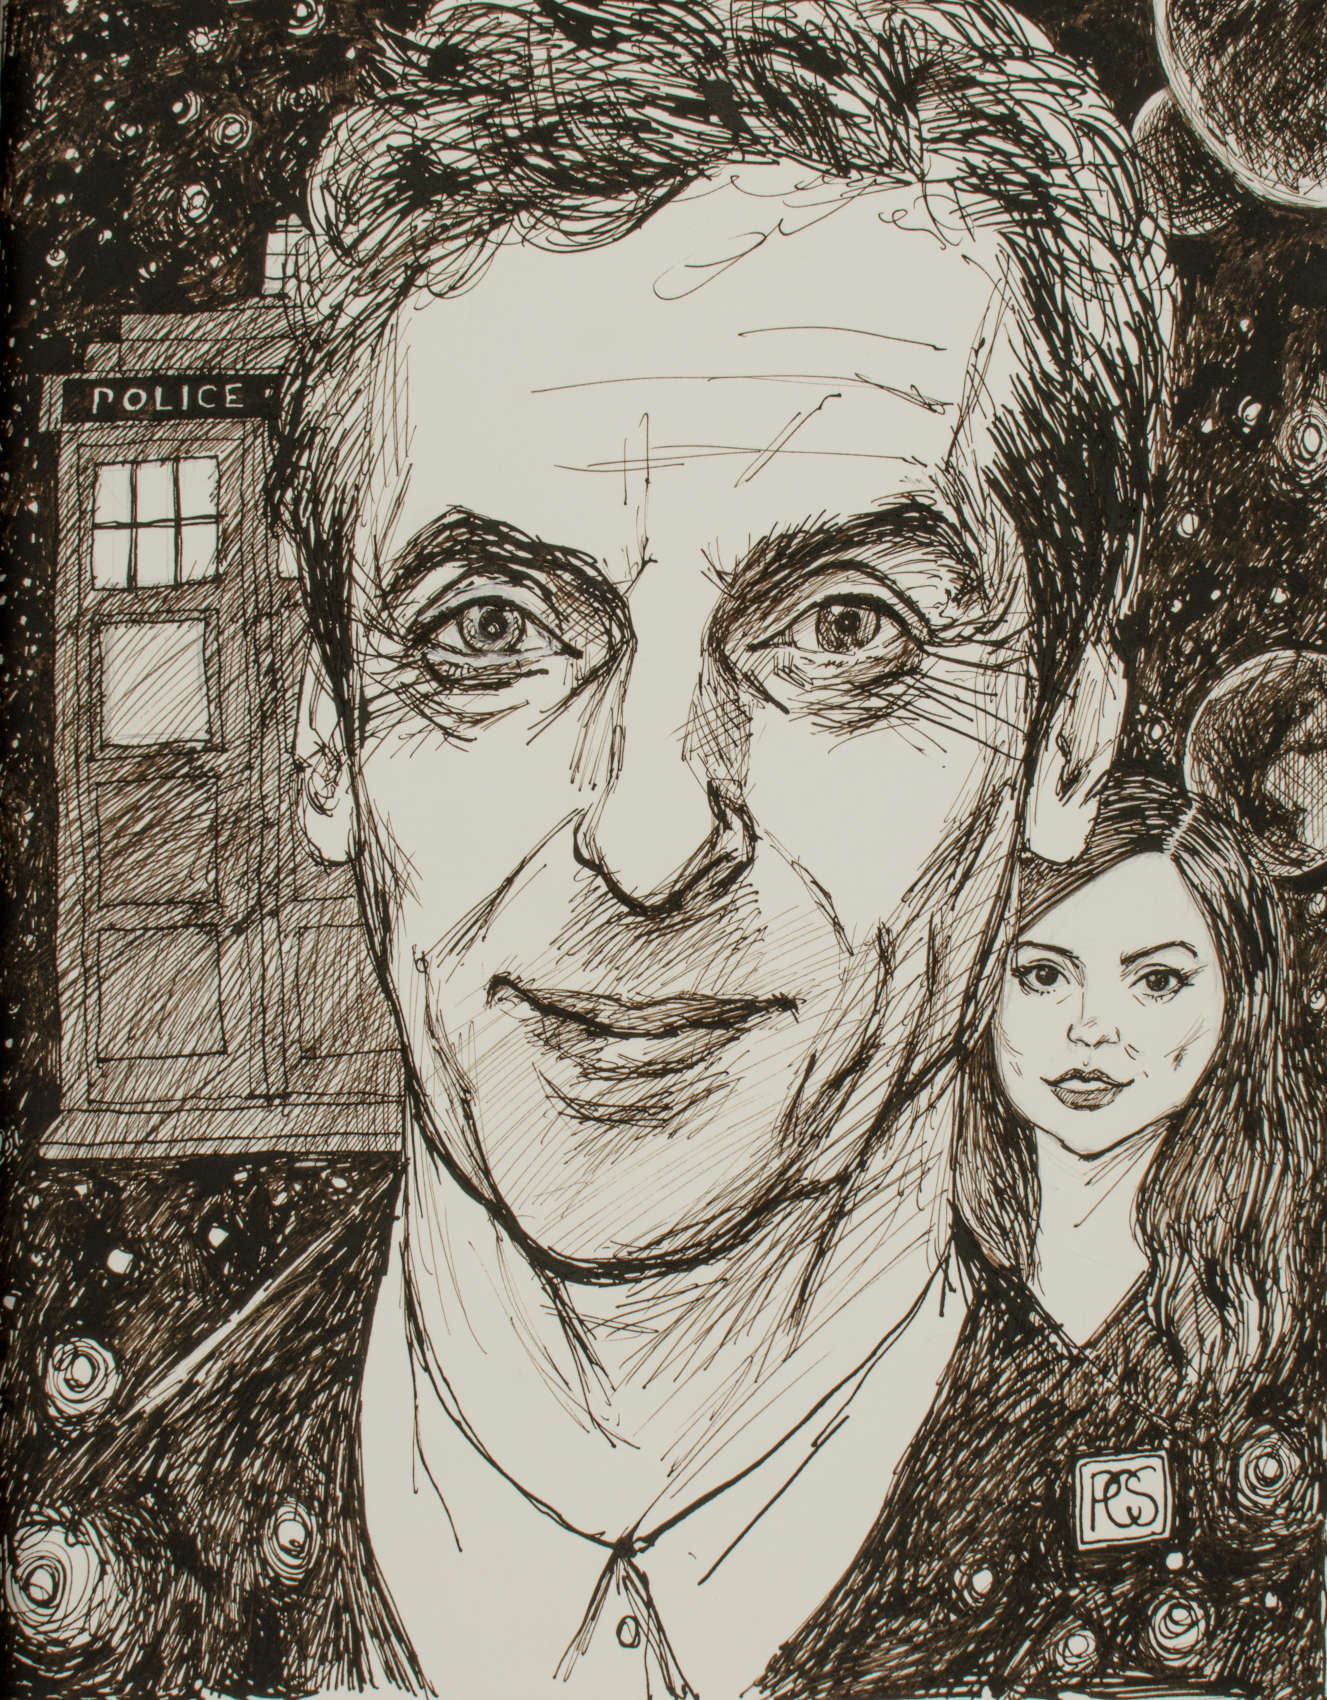 Portrait of Peter Capaldi as the twelfth Doctor Who with Clara Oswald and TARDIS